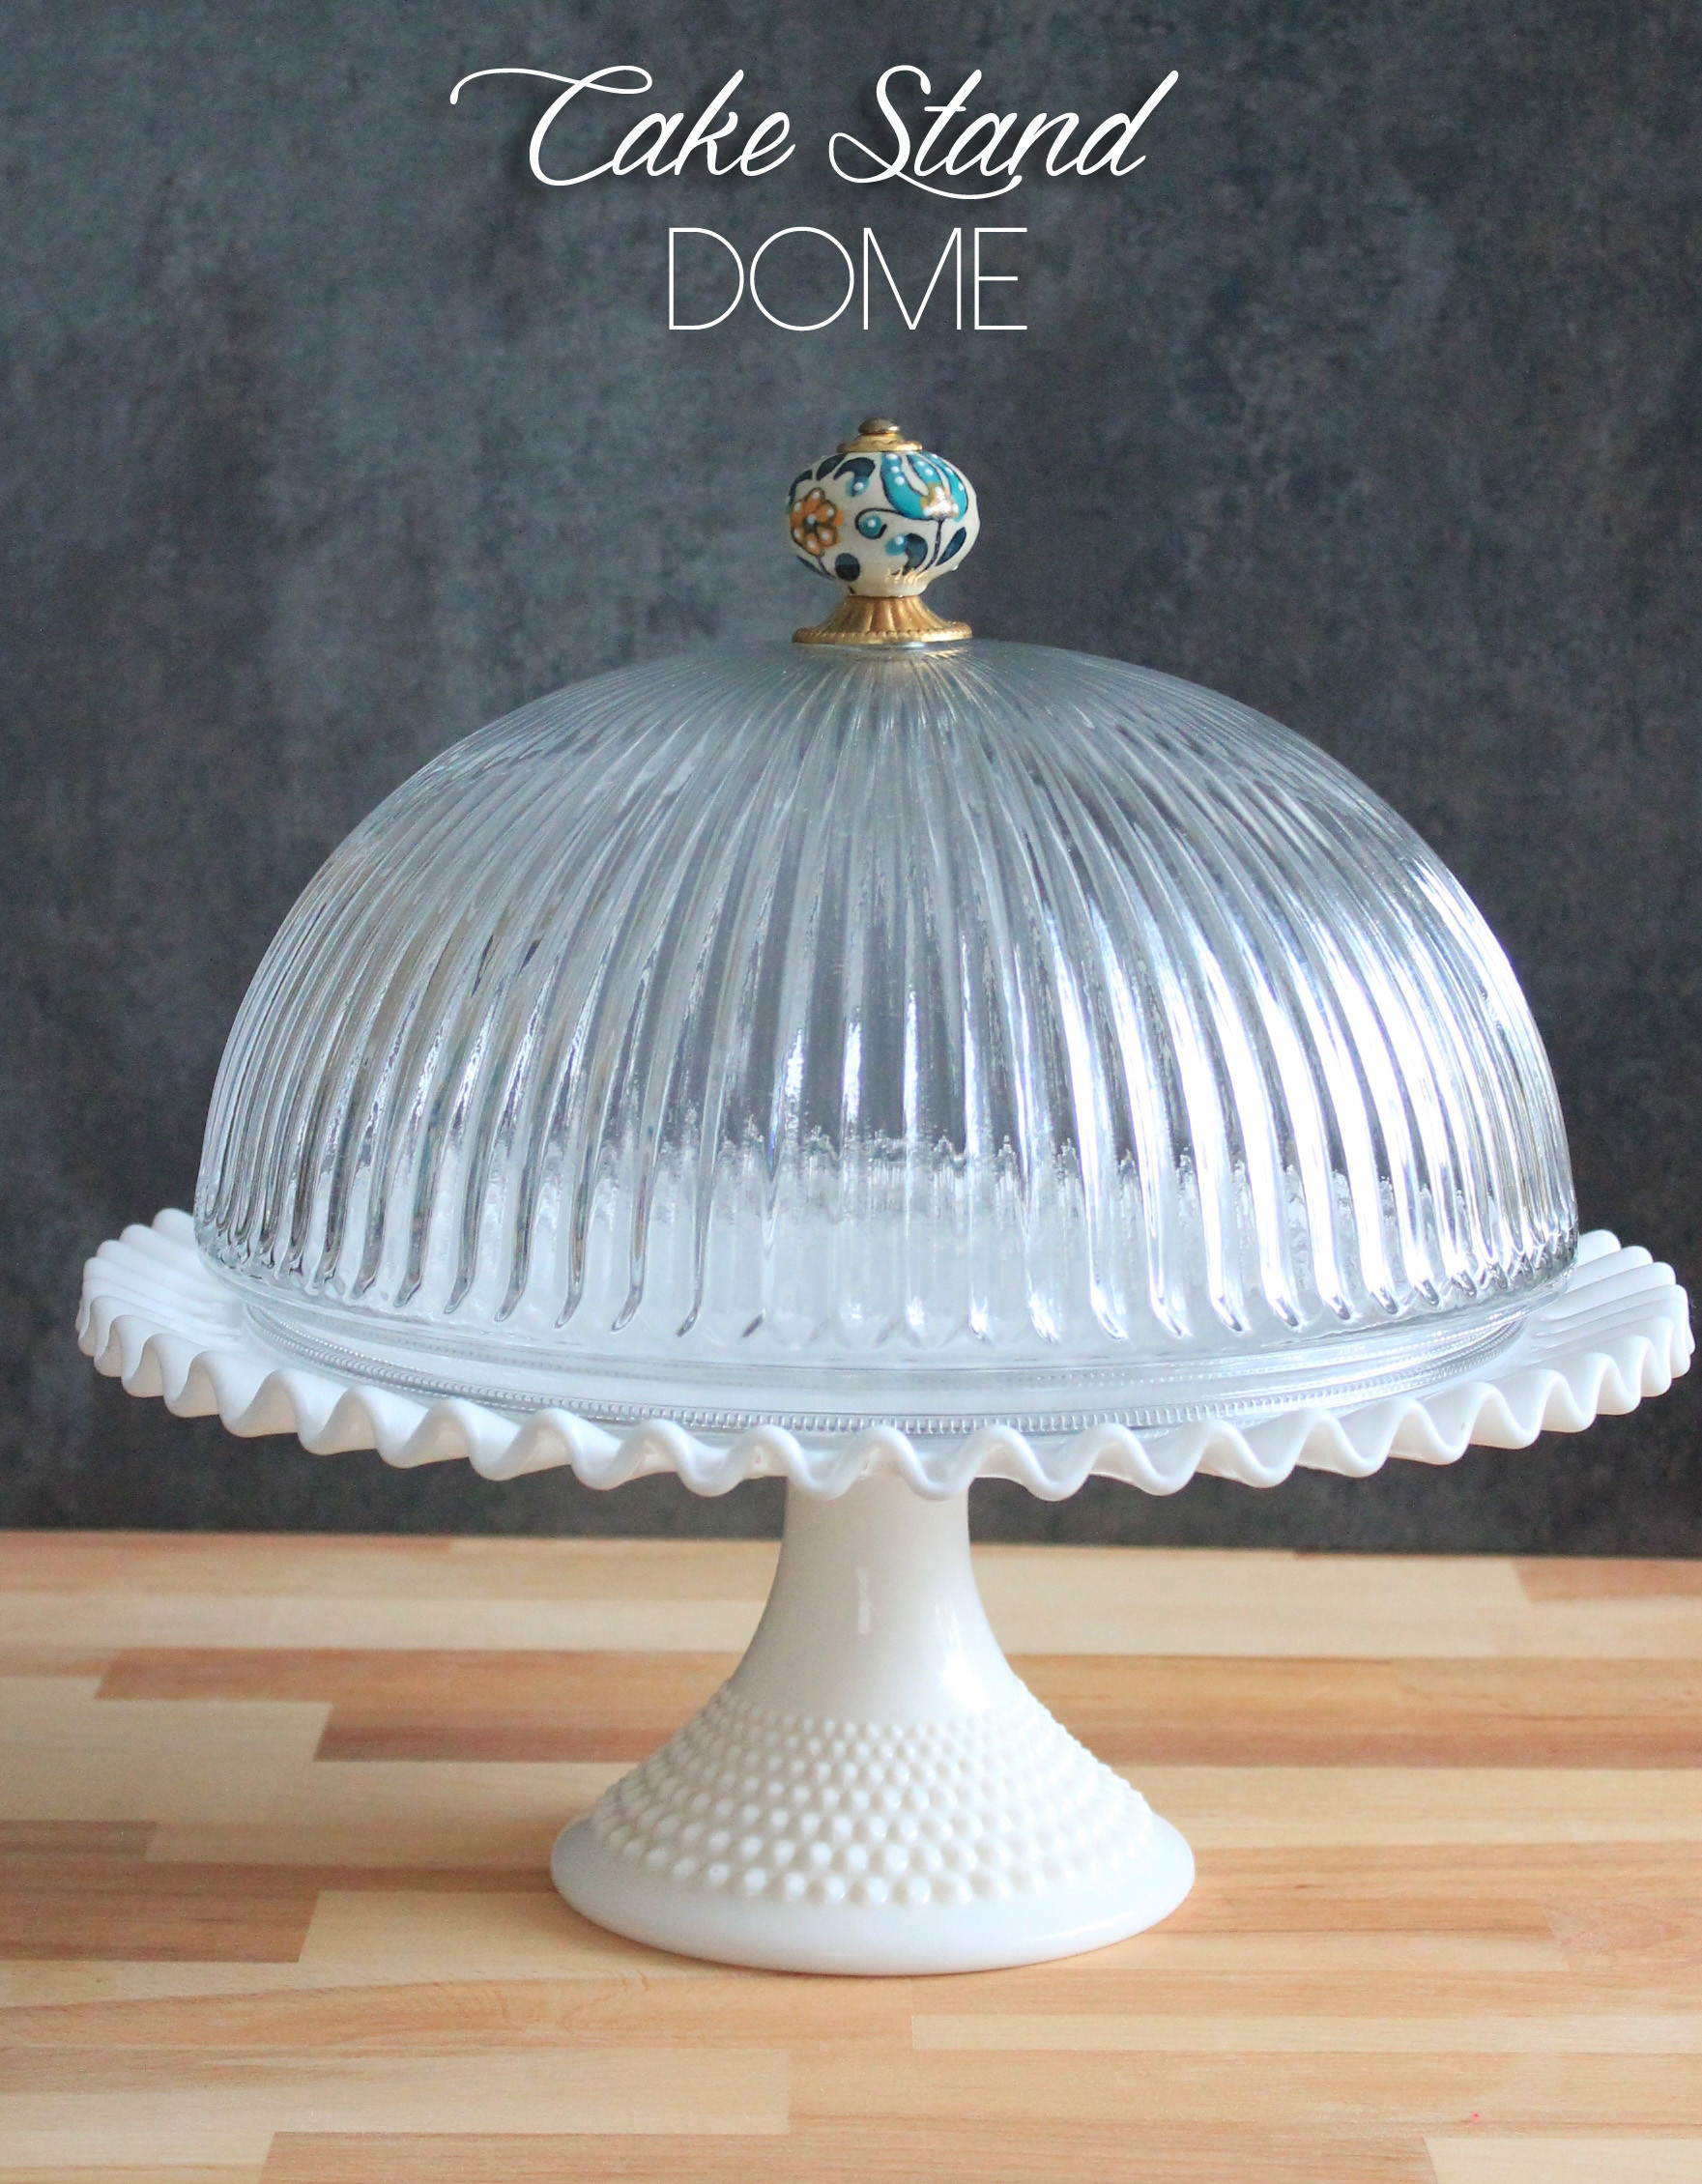 Best ideas about DIY Cake Stand
. Save or Pin DIY Cake Stand Dome BeWhatWeLove Now.